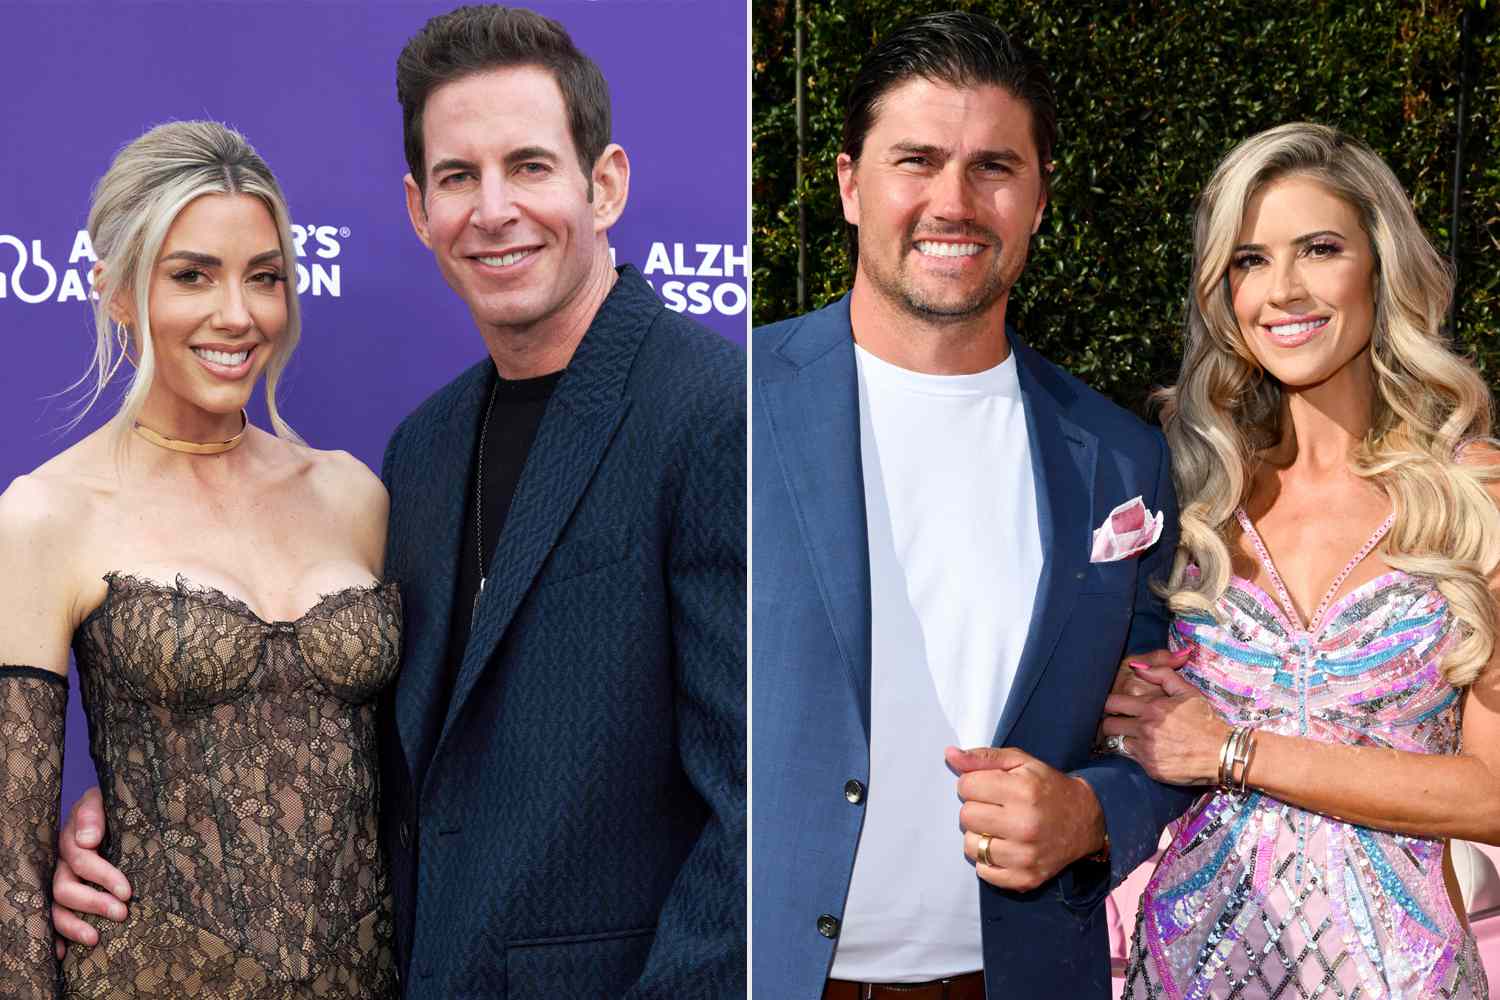 Tarek El Moussa Speaks Out About Ex Christina Hall's Divorce: ‘She’s Gonna Get Through This’